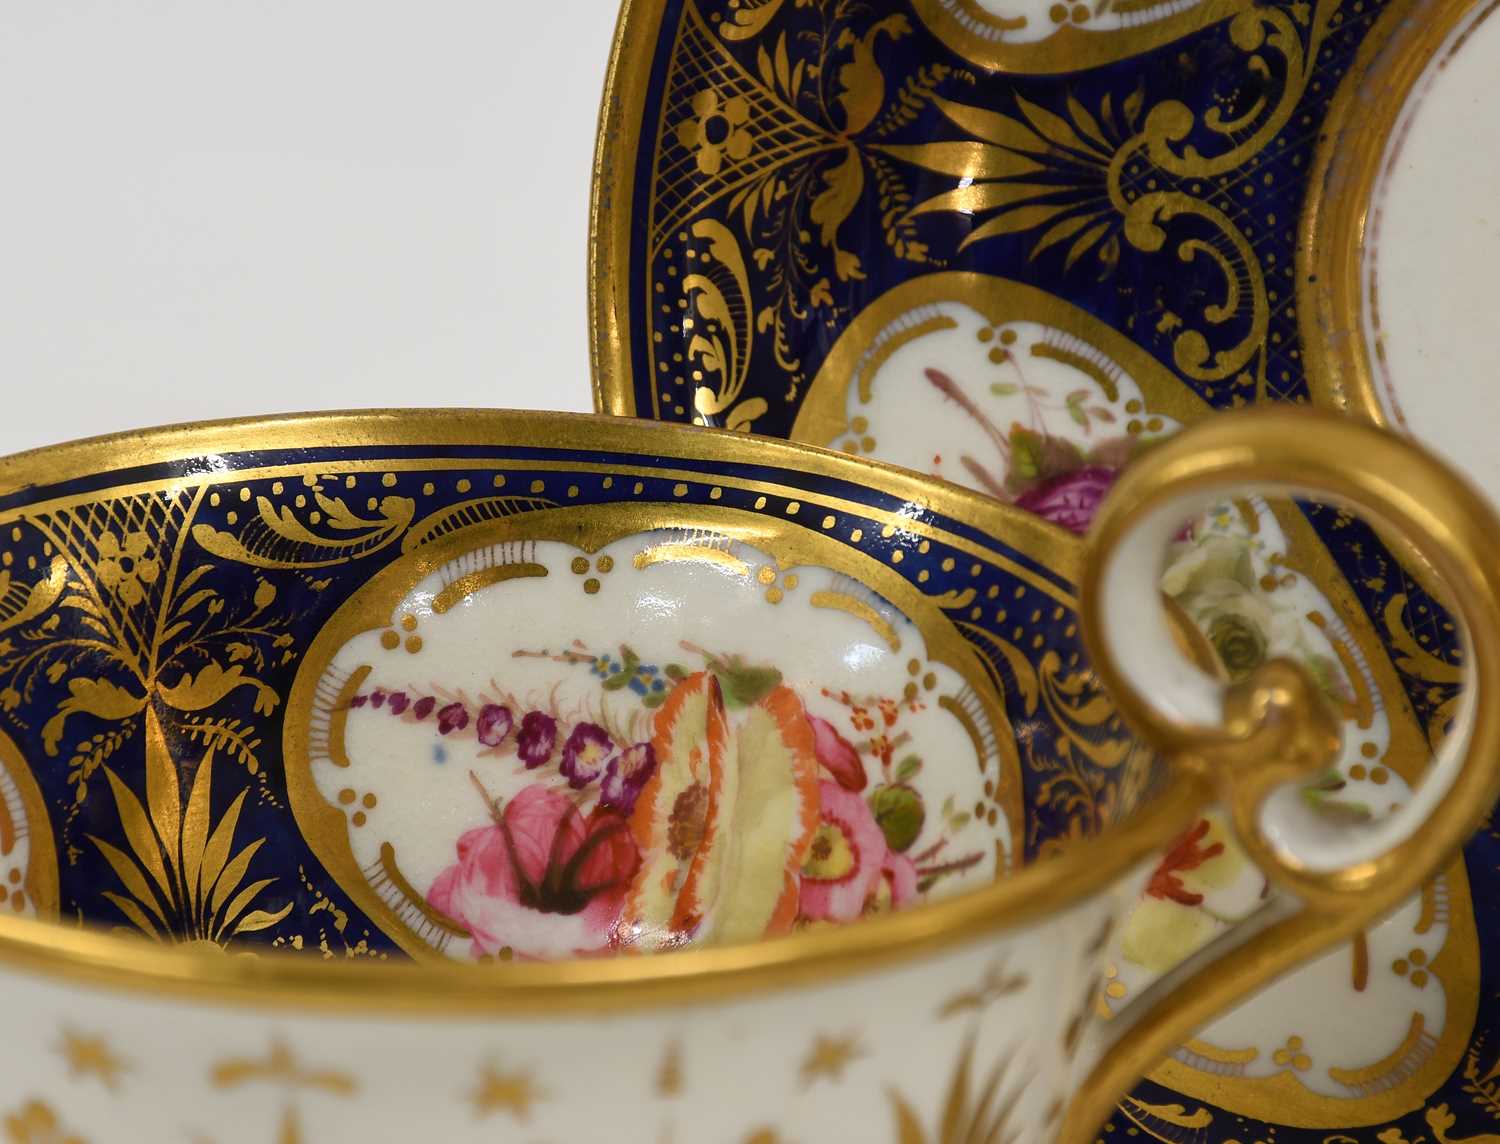 A Nantgarw Porcelain Teacup and Saucer, circa 1818-20, painted with buildings in landscape on a - Image 2 of 13